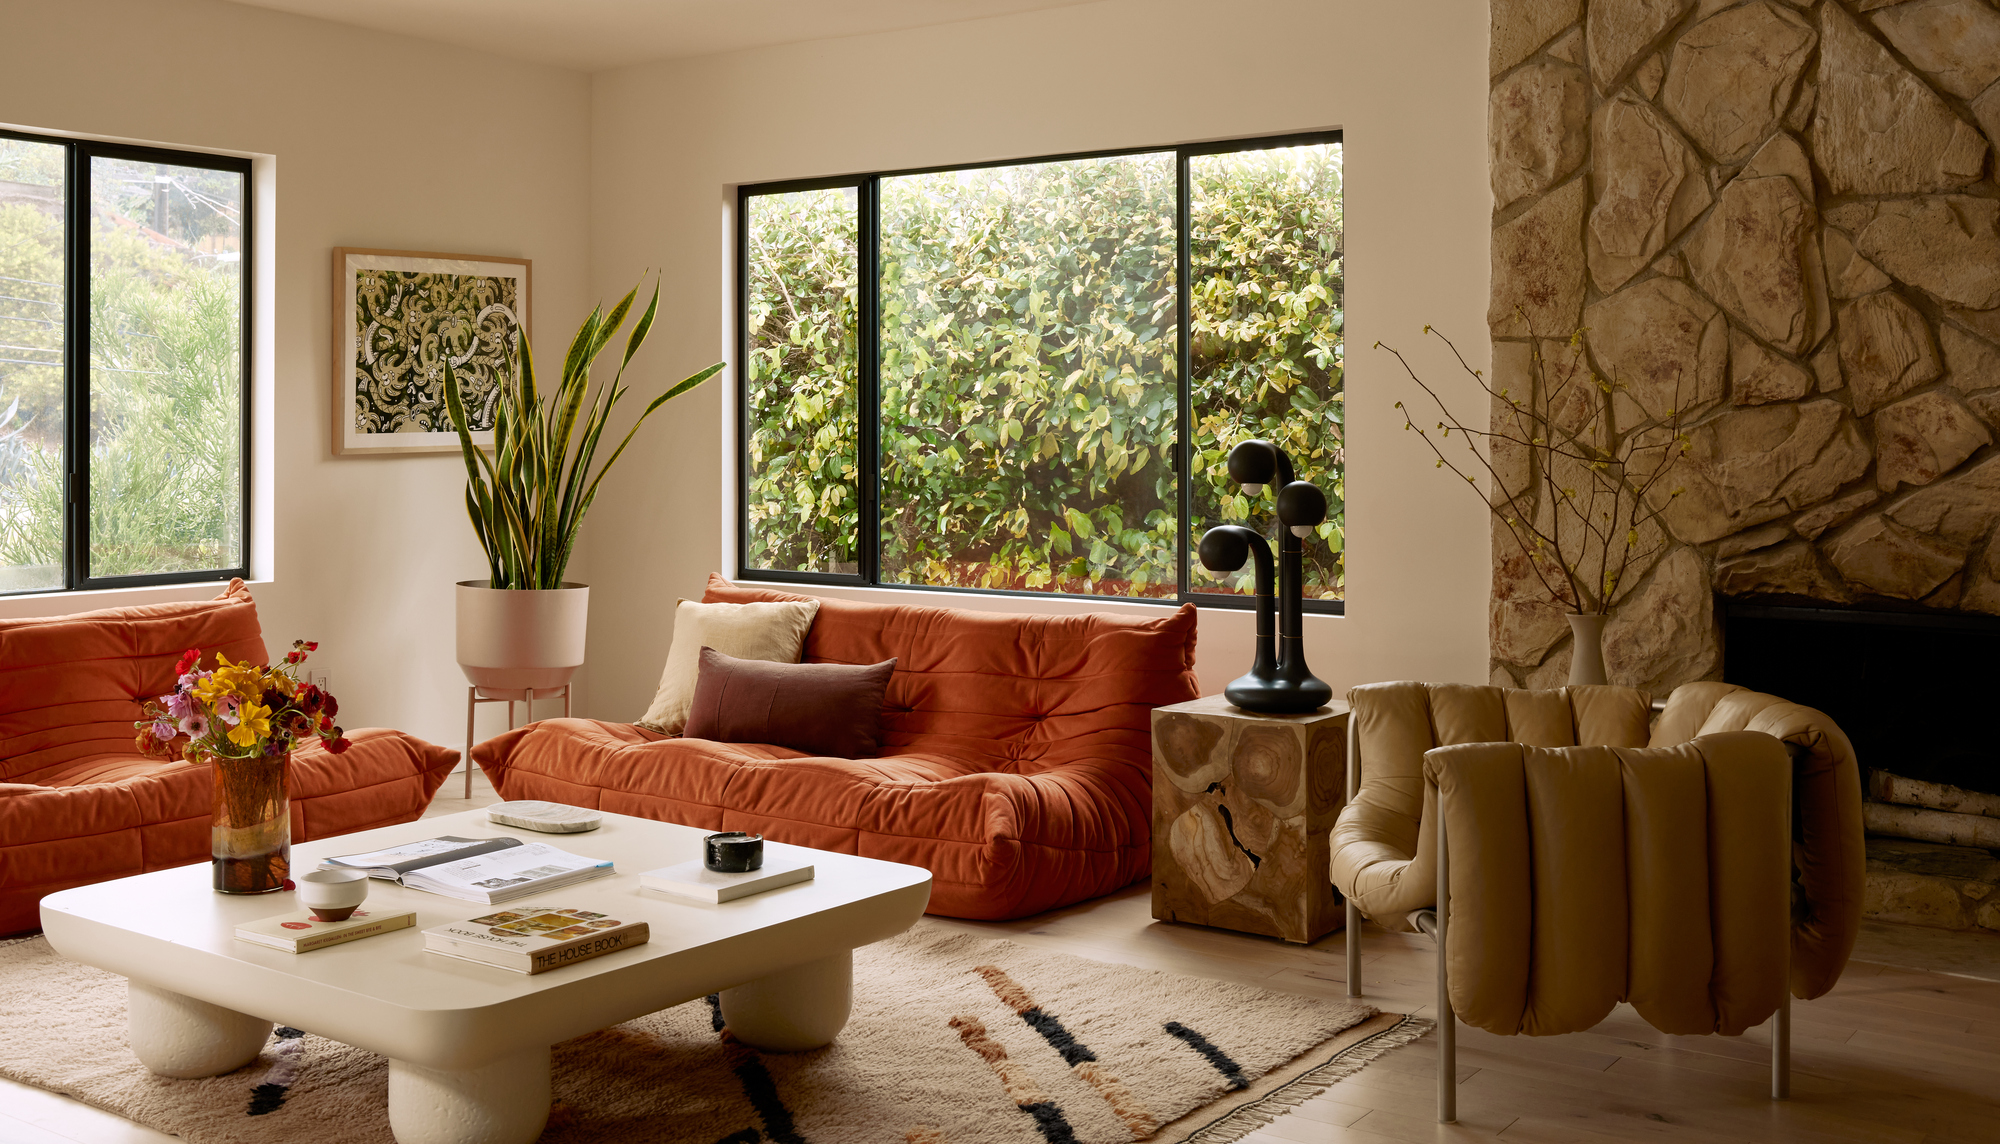 A living room with mid-century color palette